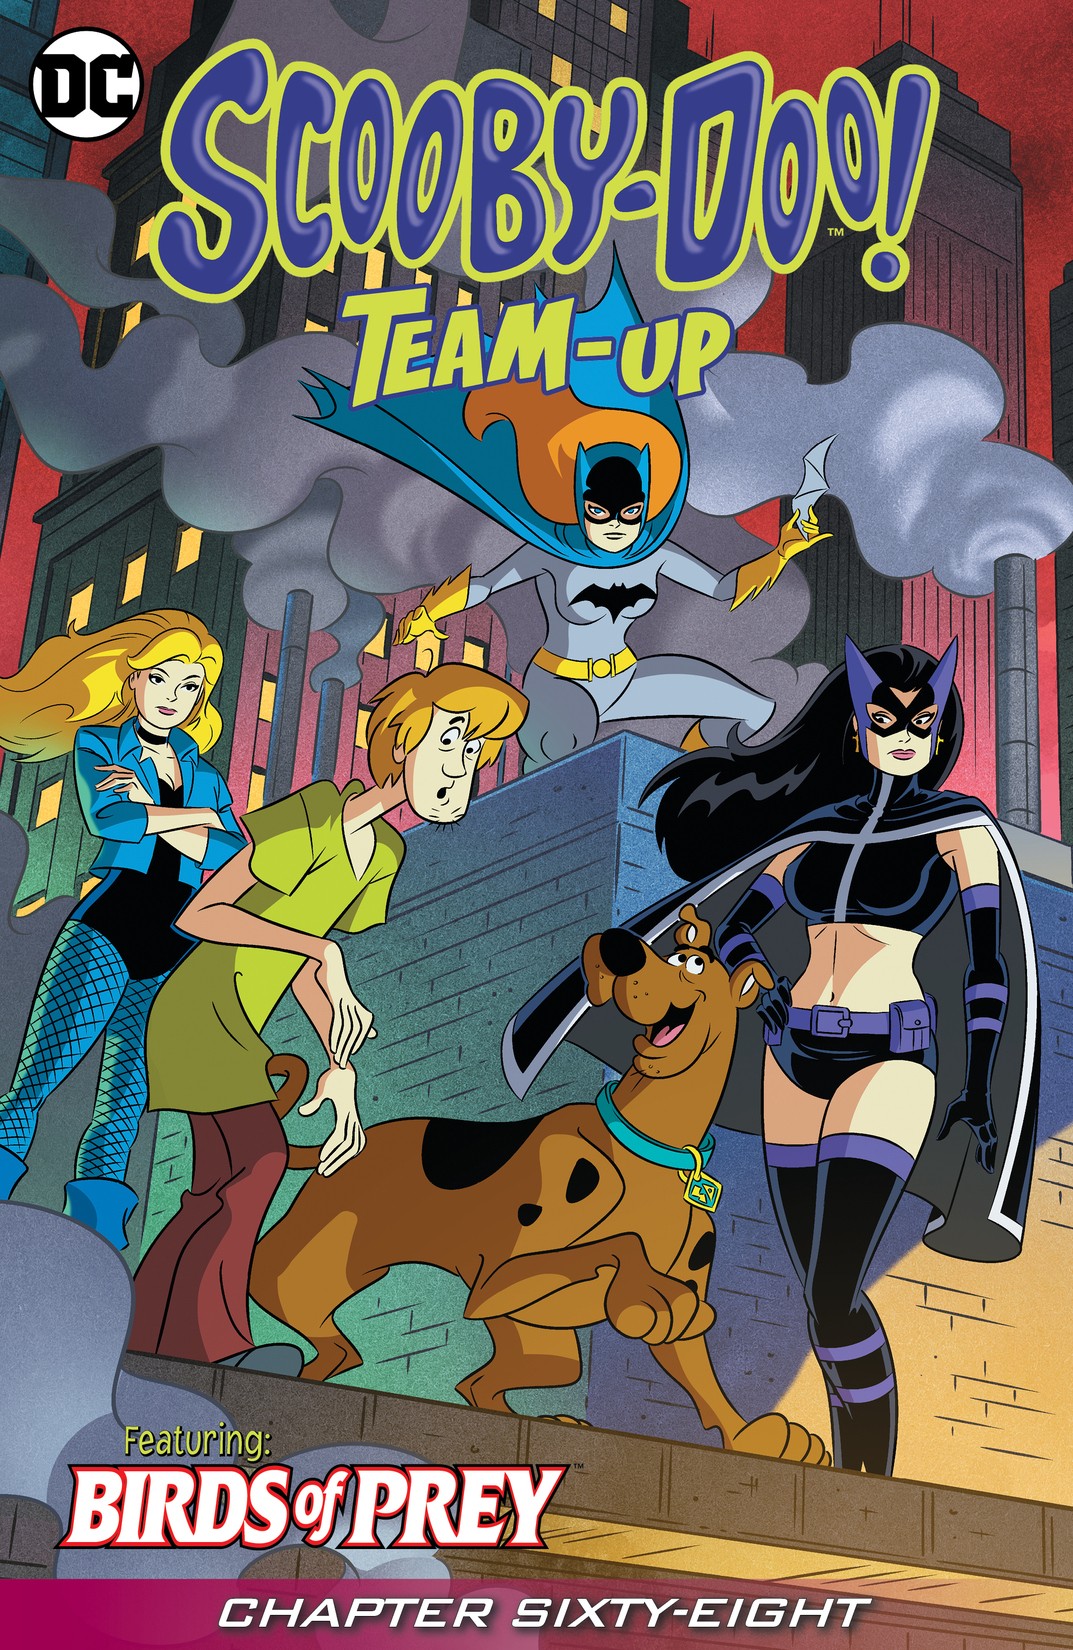 Scooby-Doo Team-Up #68 preview images